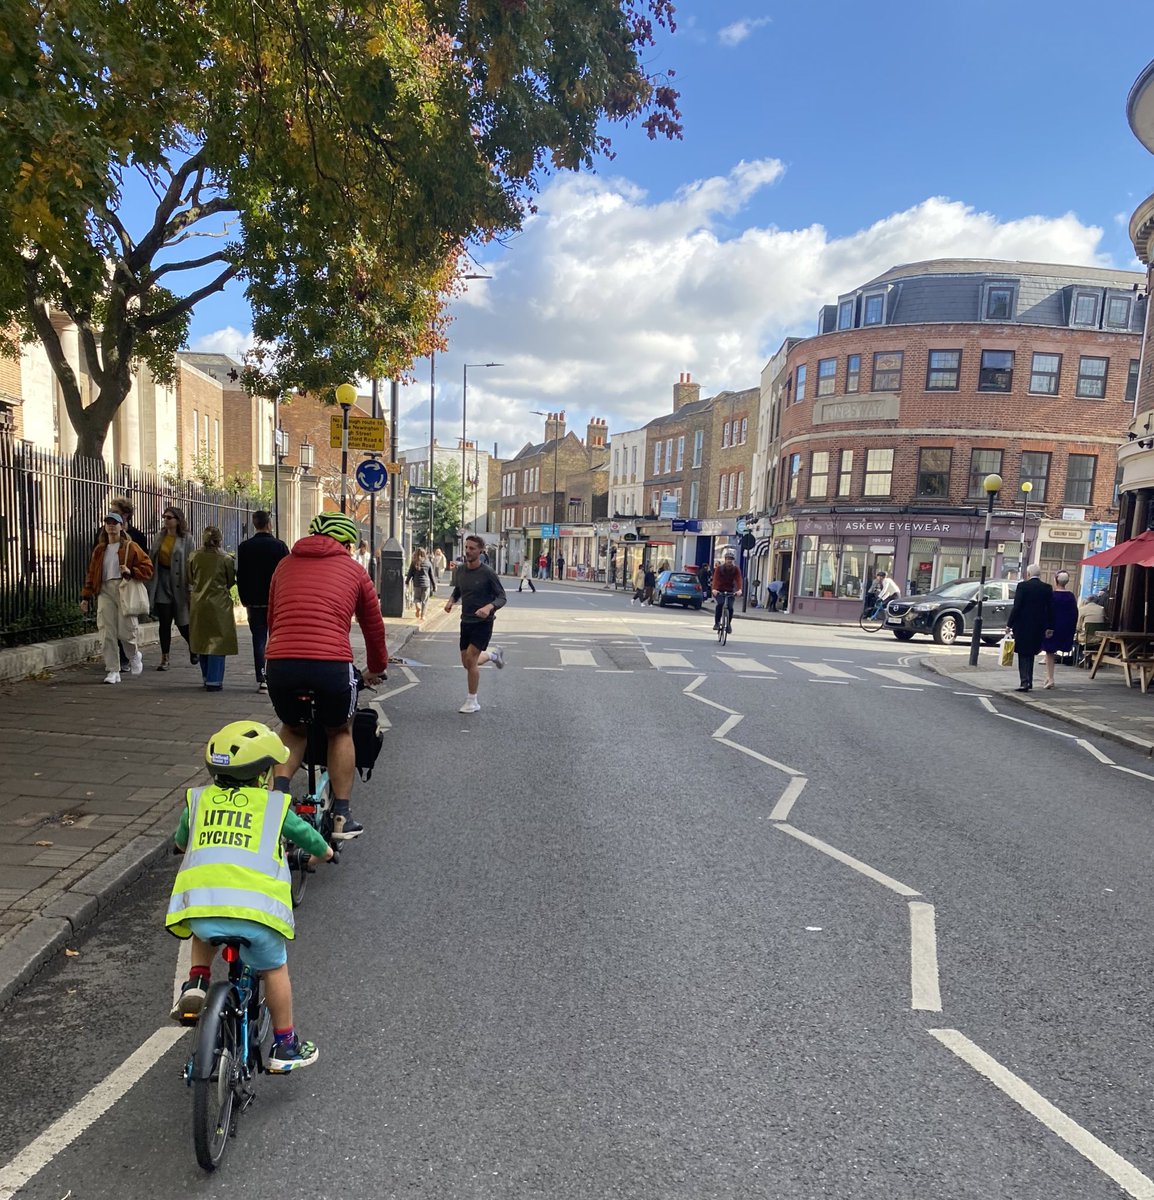 It’s was so lovely to see so many #cyclist, #runners & #walkers out and about in #Stokey today. It’s great to see the new wider pavements on #StokeNewington Church Street getting so much action…the place was buzzing! #LTNs #climatesafestreets #ActiveTravel #Hackney